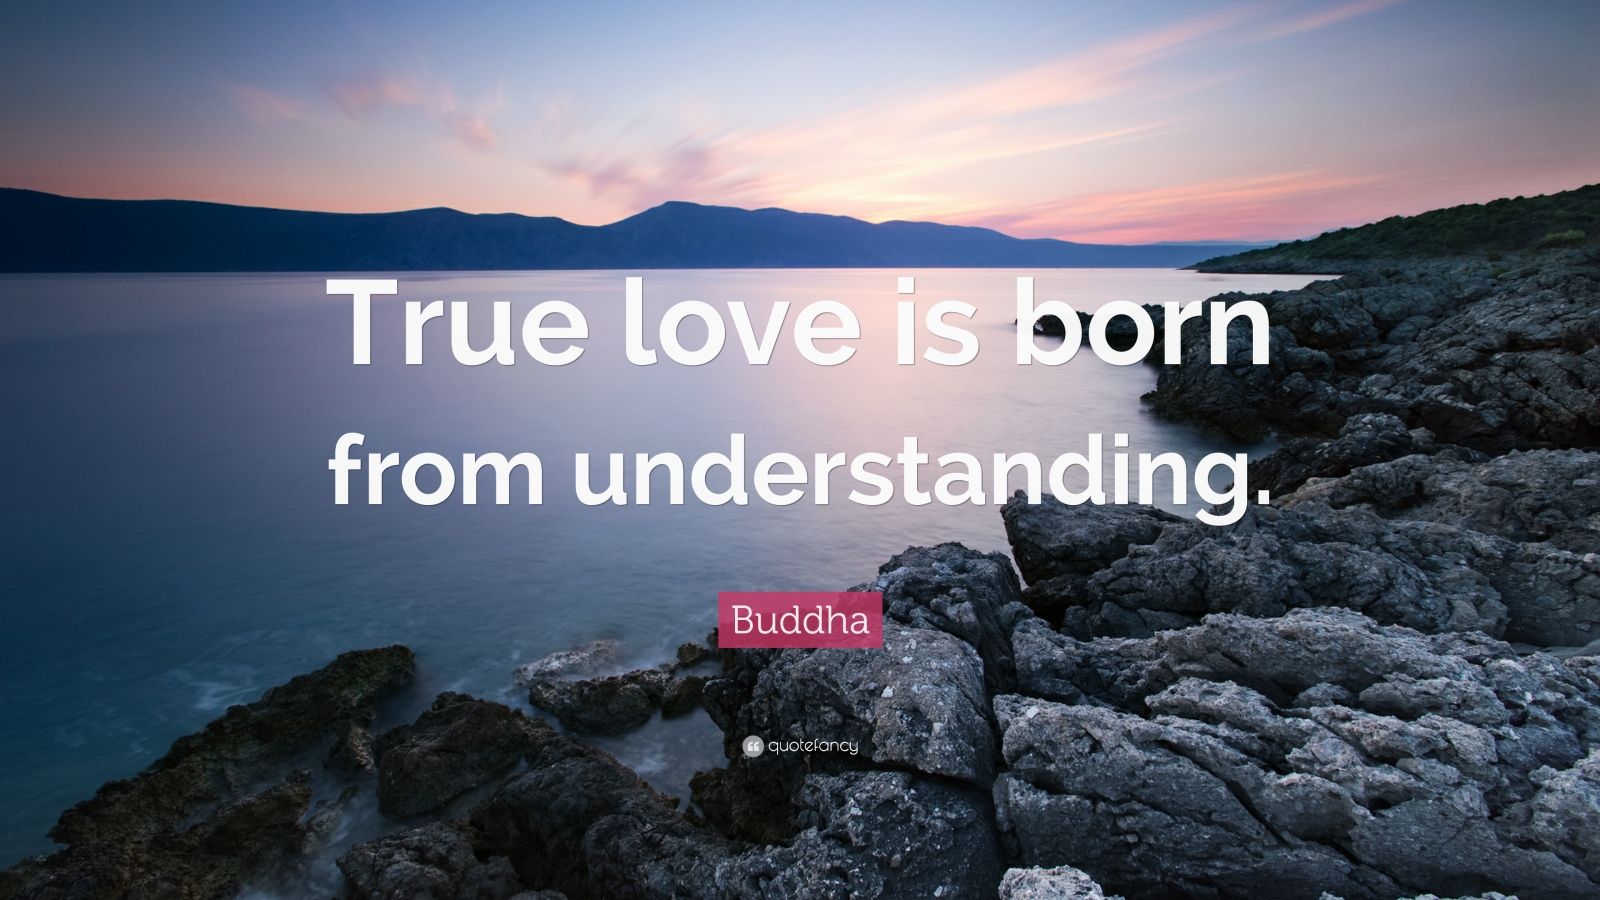 Buddha Quote “True love is born from understanding ”